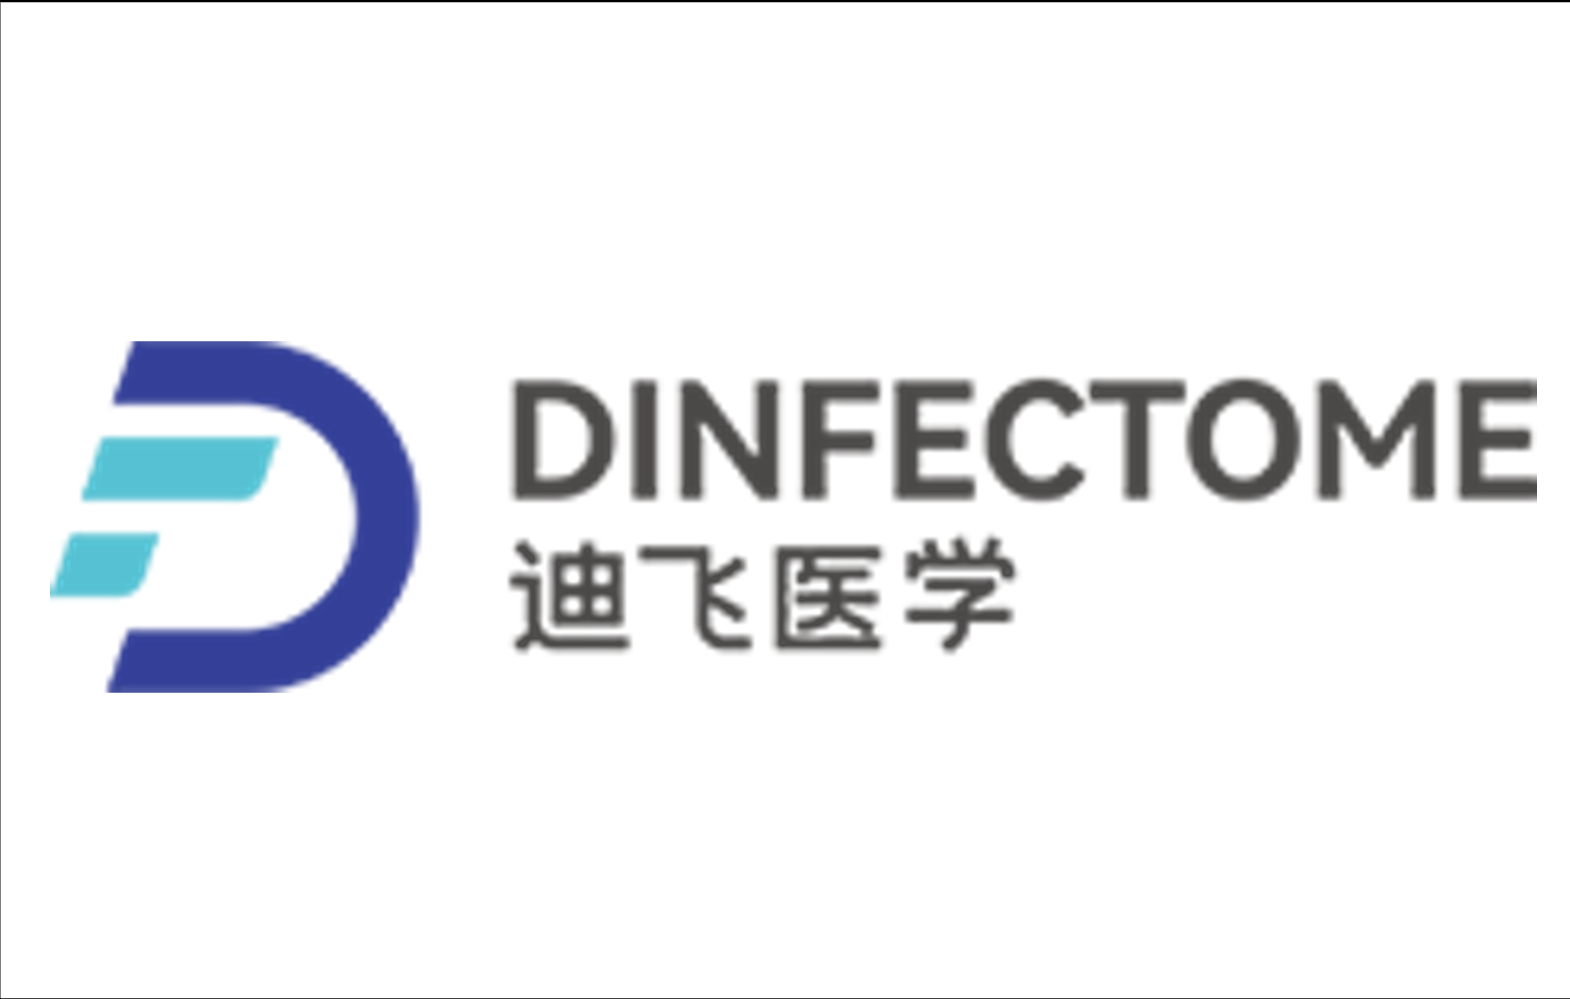 Dinfectome Nabs China NMPA Approval for Benchtop NGS Sequencer